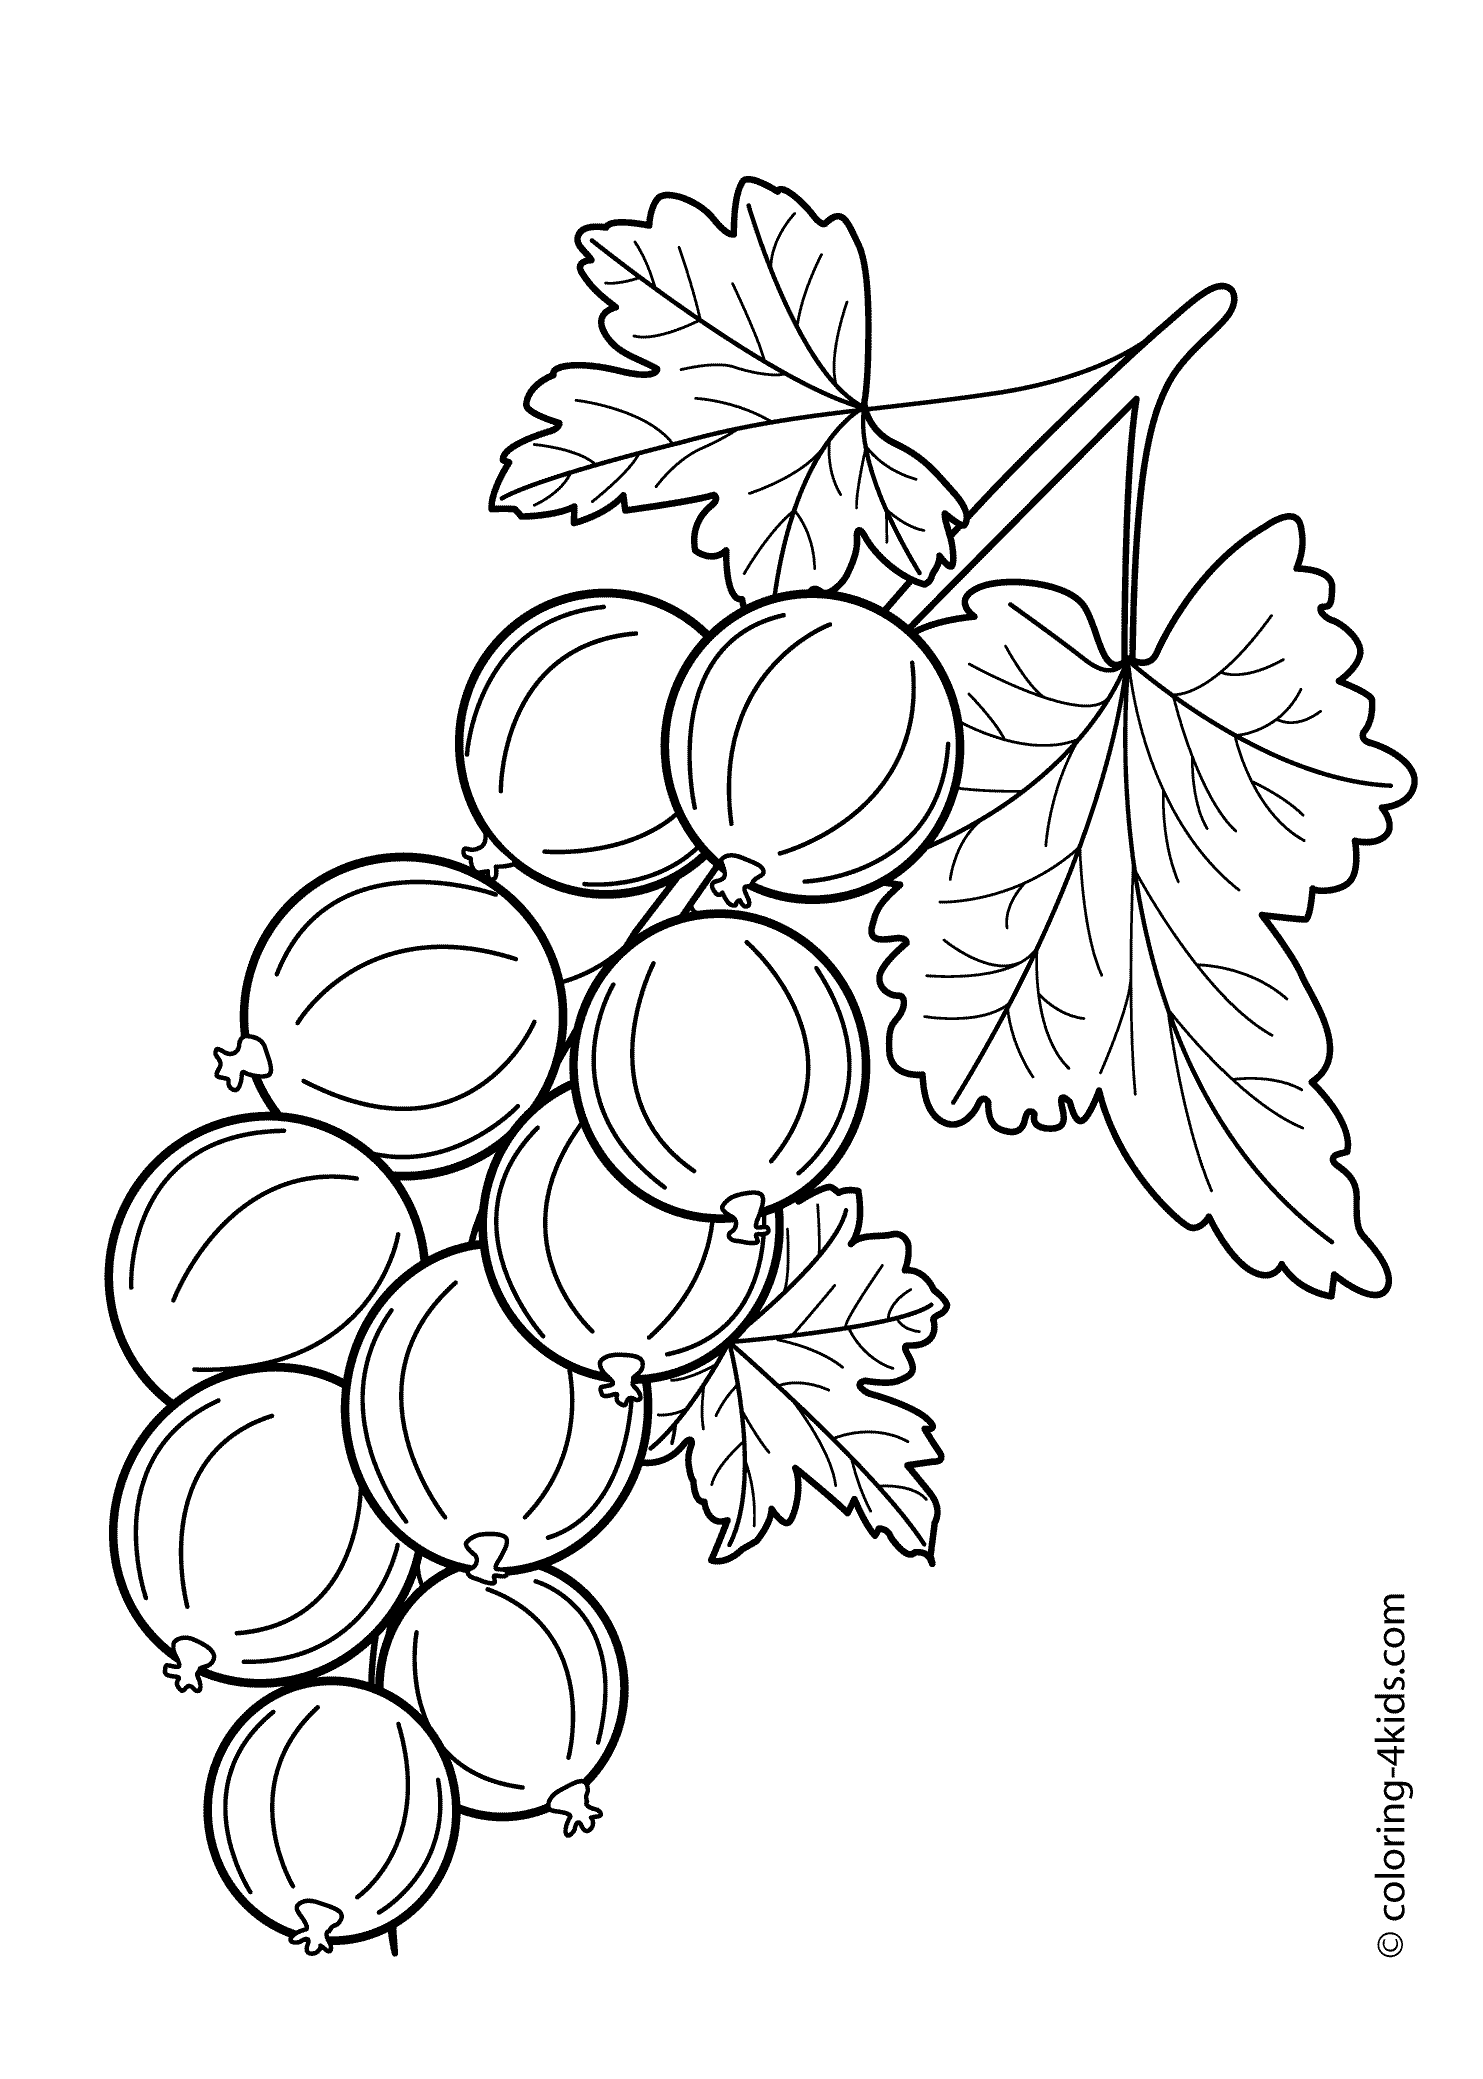 Gooseberry fruits and berries coloring pages for kids printable free fruit coloring pages flower drawing coloring pages